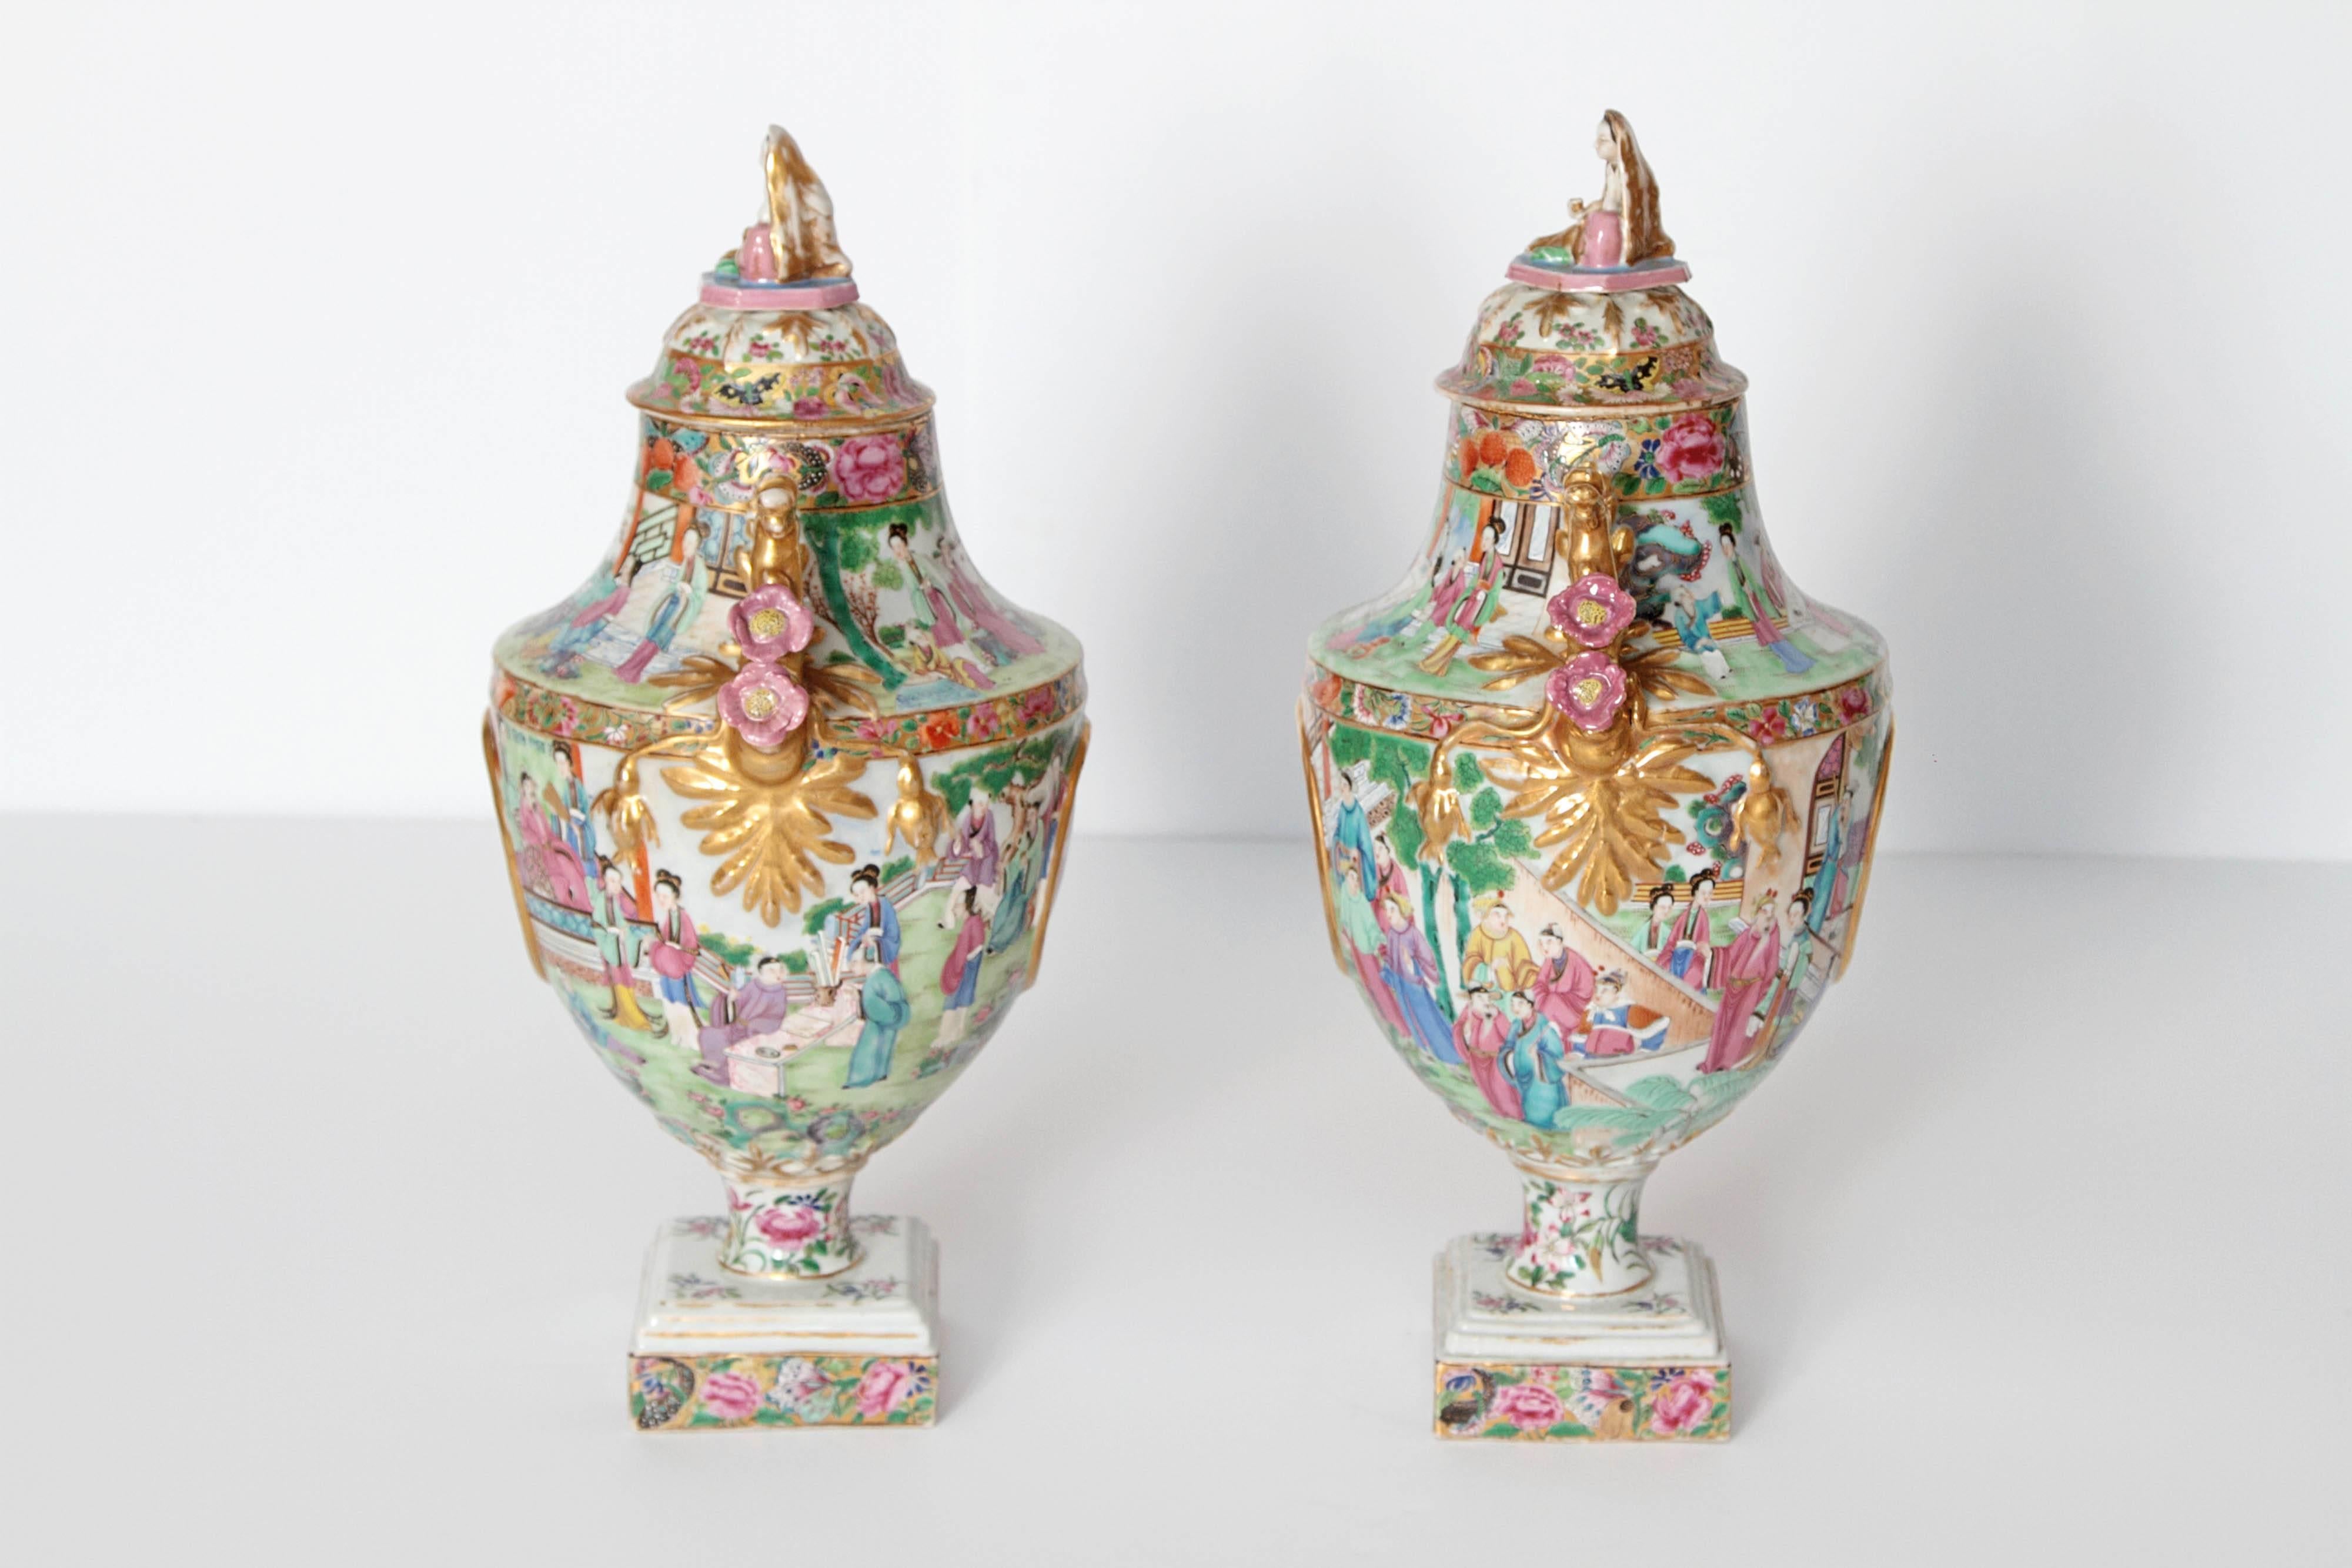 Gilt Chinese Export Covered Urns, Pair